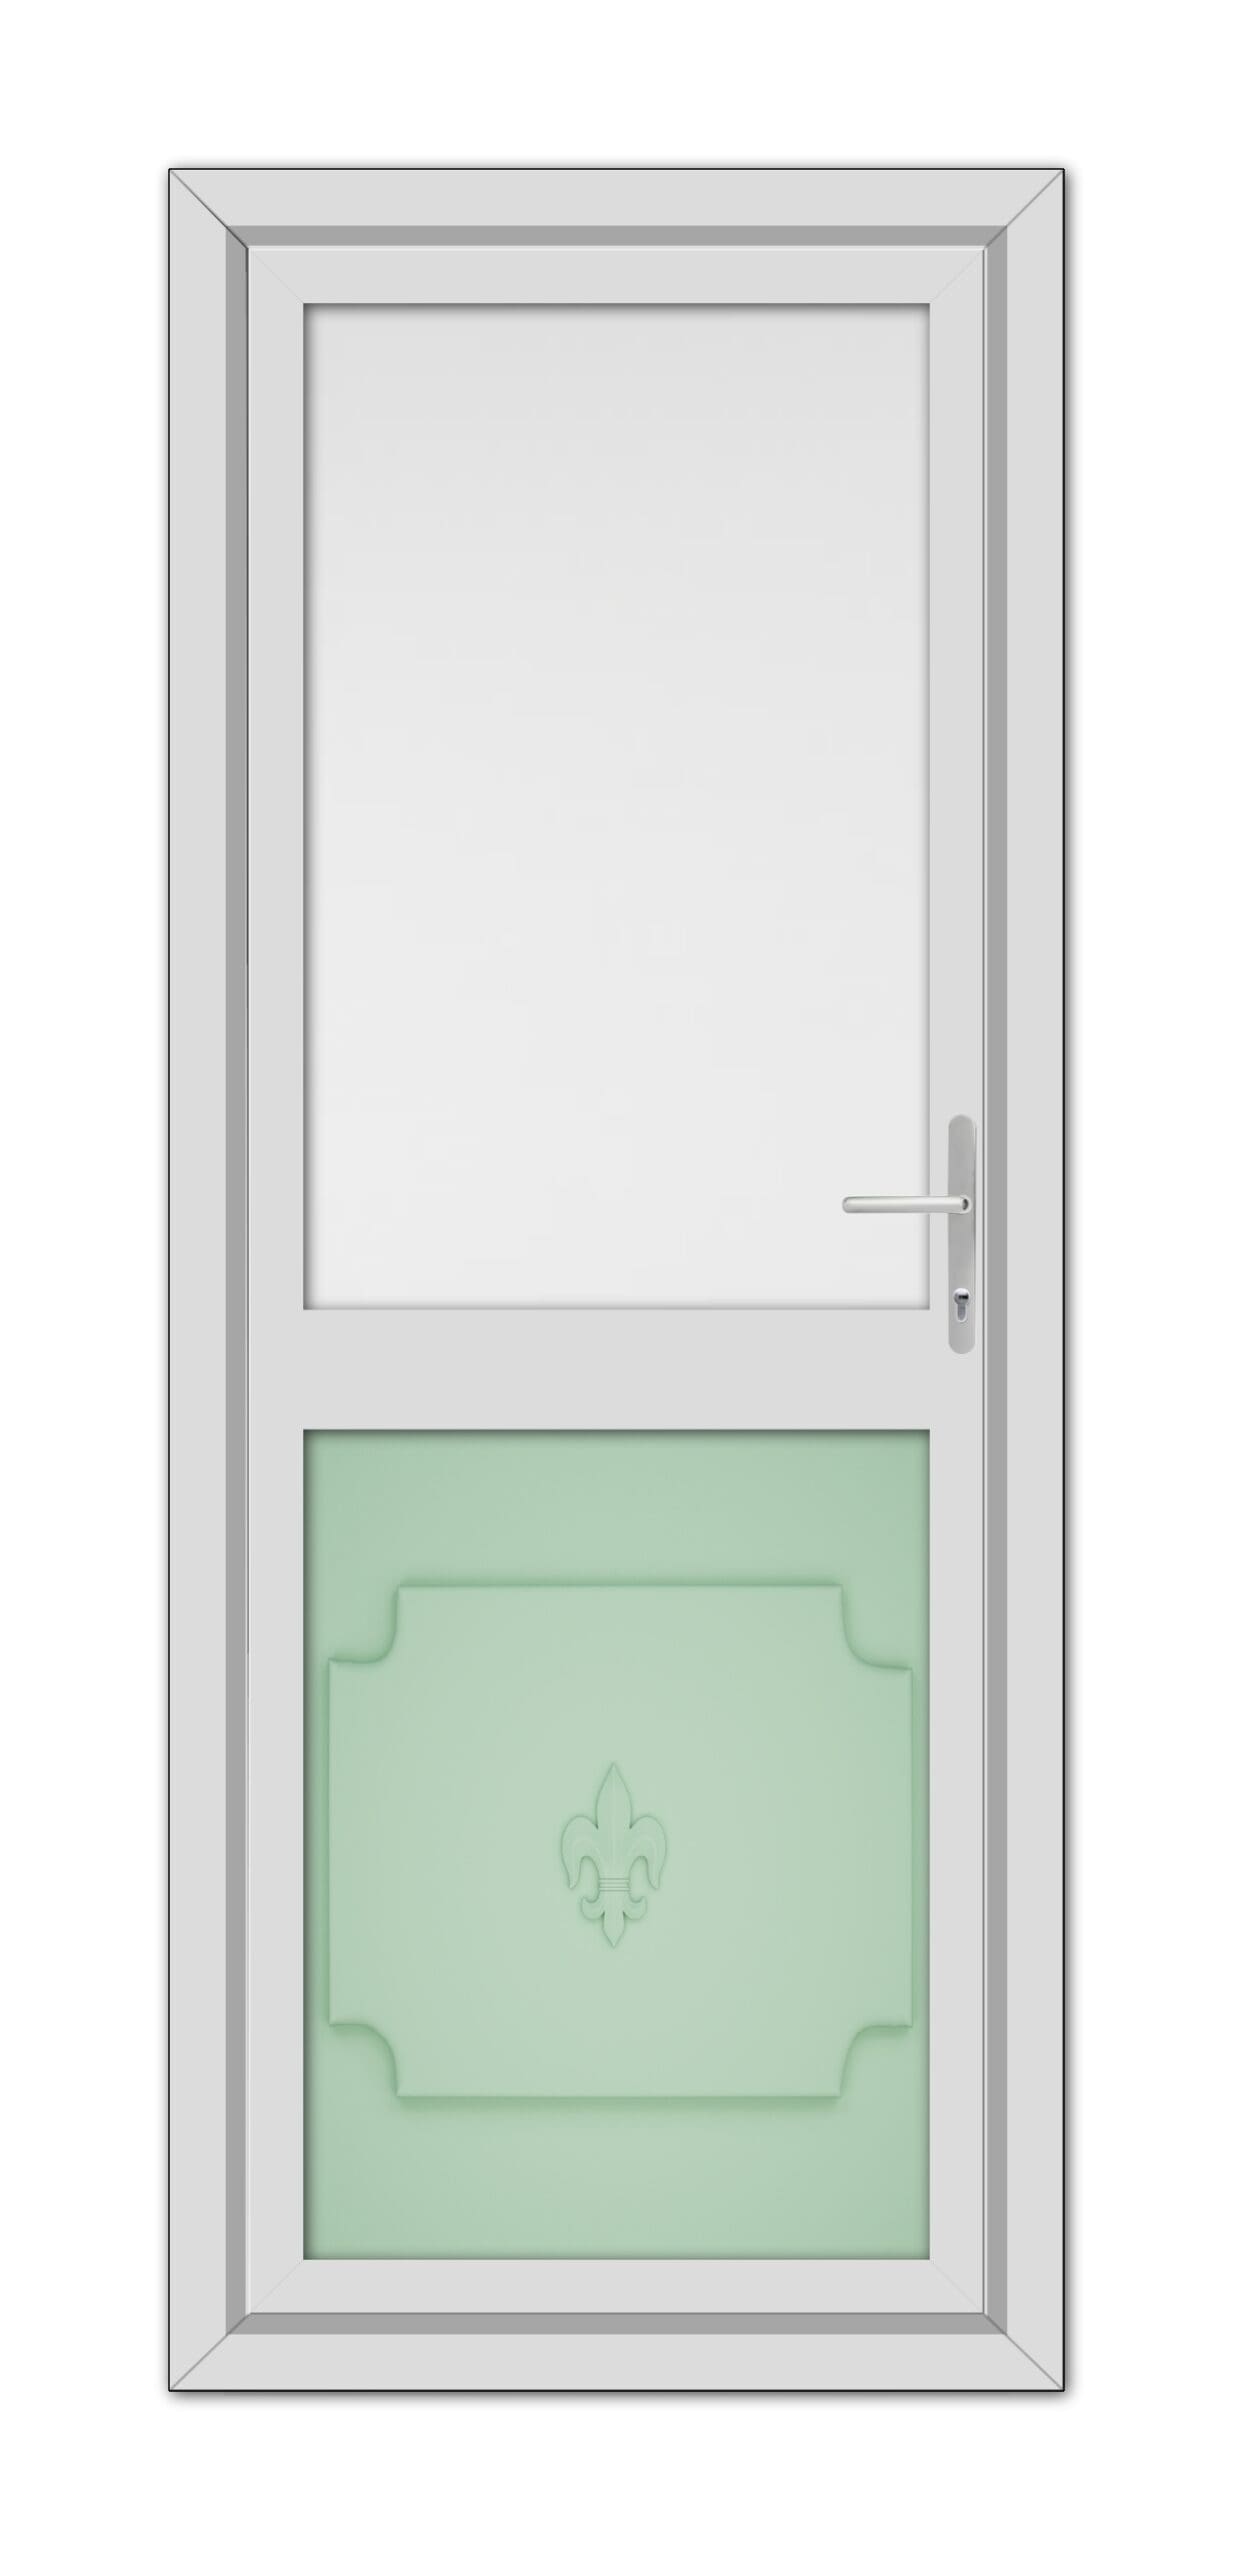 A modern Chartwell Green Abbey Half uPVC Back Door with a lower mint green panel featuring a white fleur-de-lis design, and a silver handle on the right side.